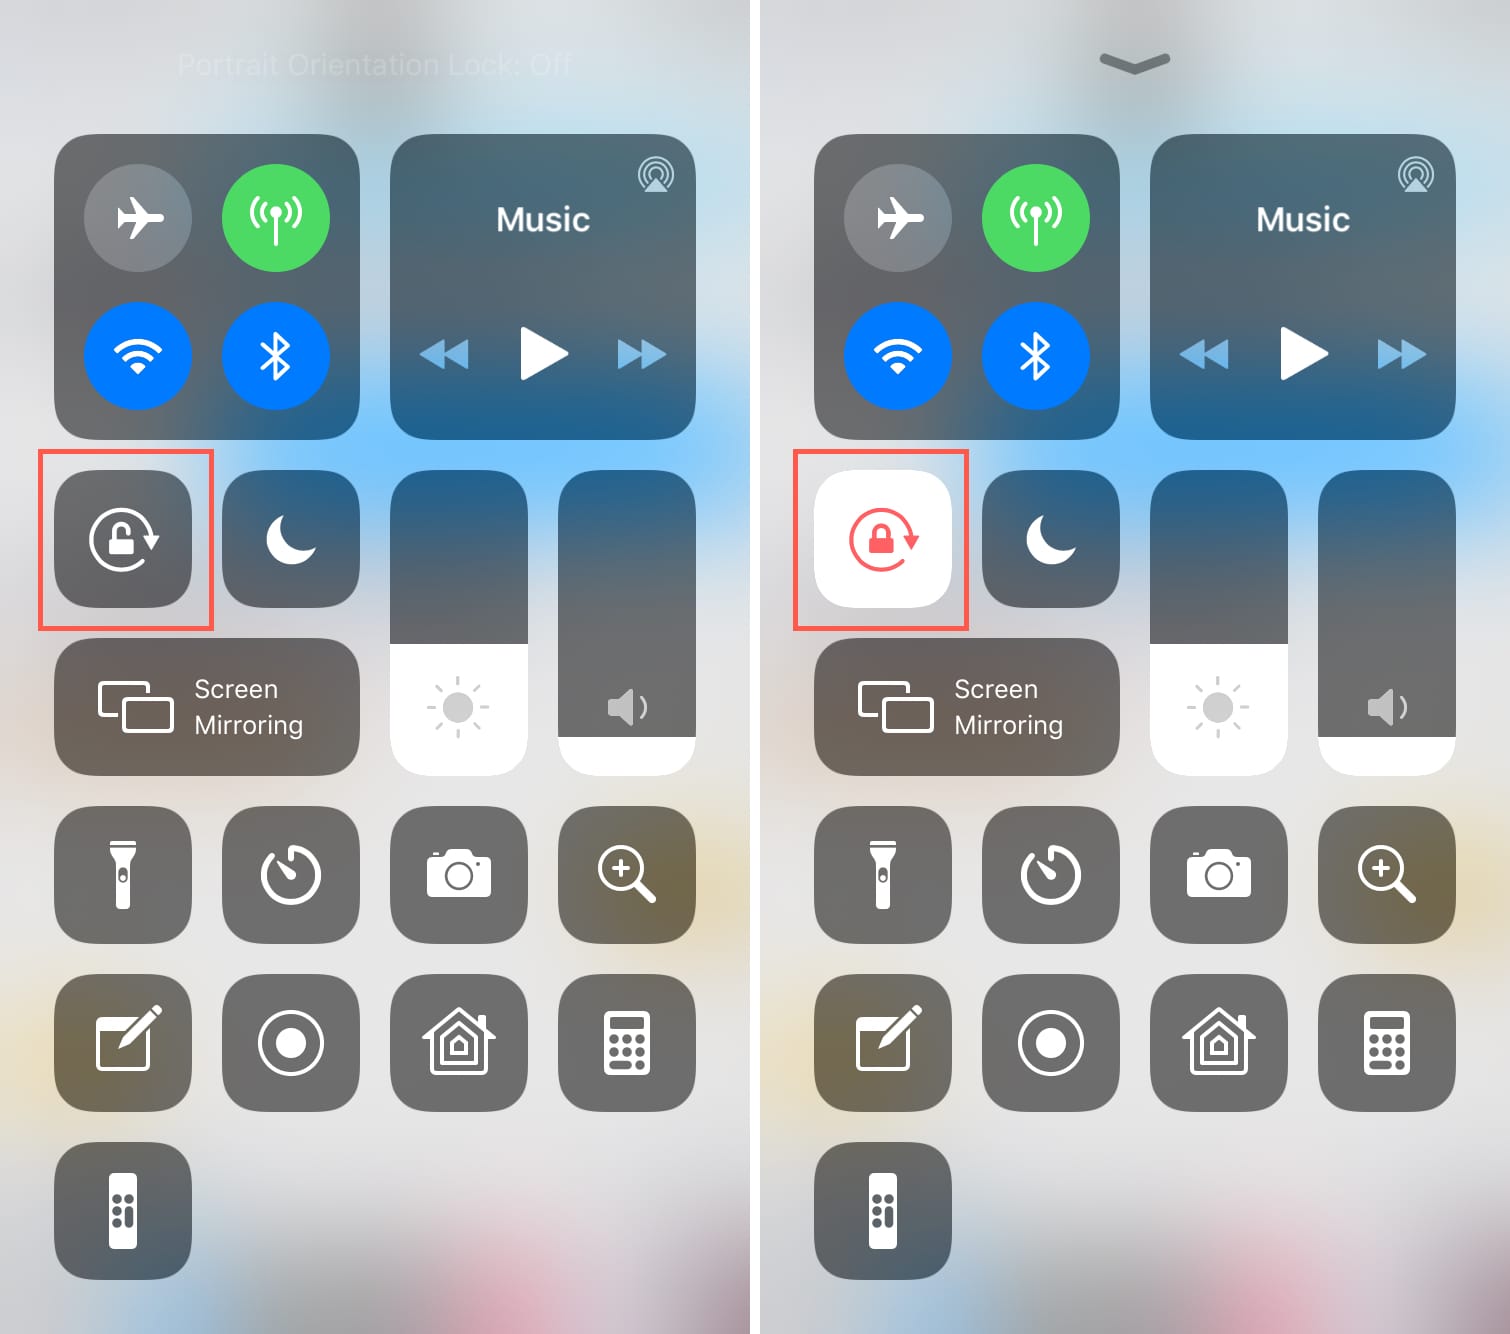 Image Flipping: Rotating Pictures On IPhone 11